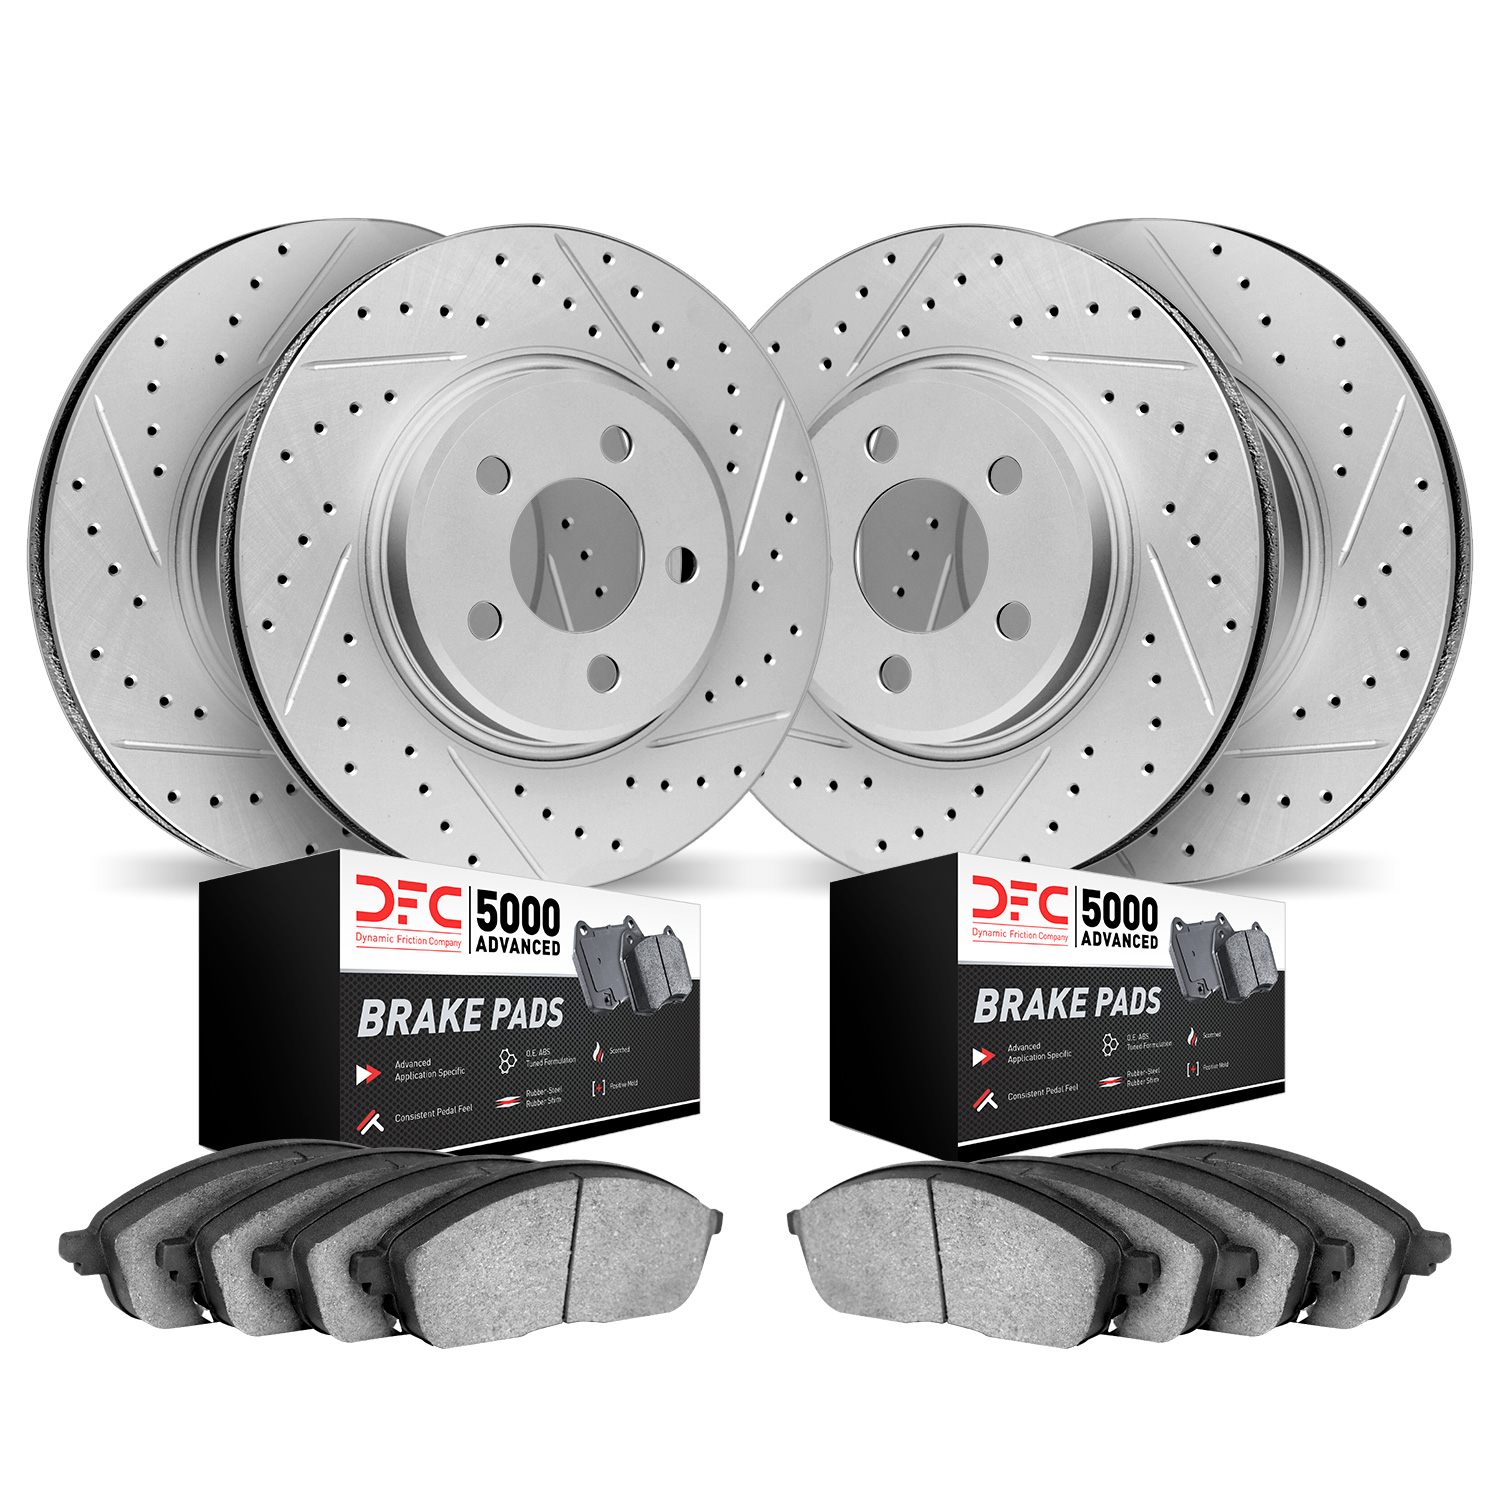 2504-02002 Geoperformance Drilled/Slotted Rotors w/5000 Advanced Brake Pads Kit, 1969-1977 Porsche, Position: Front and Rear